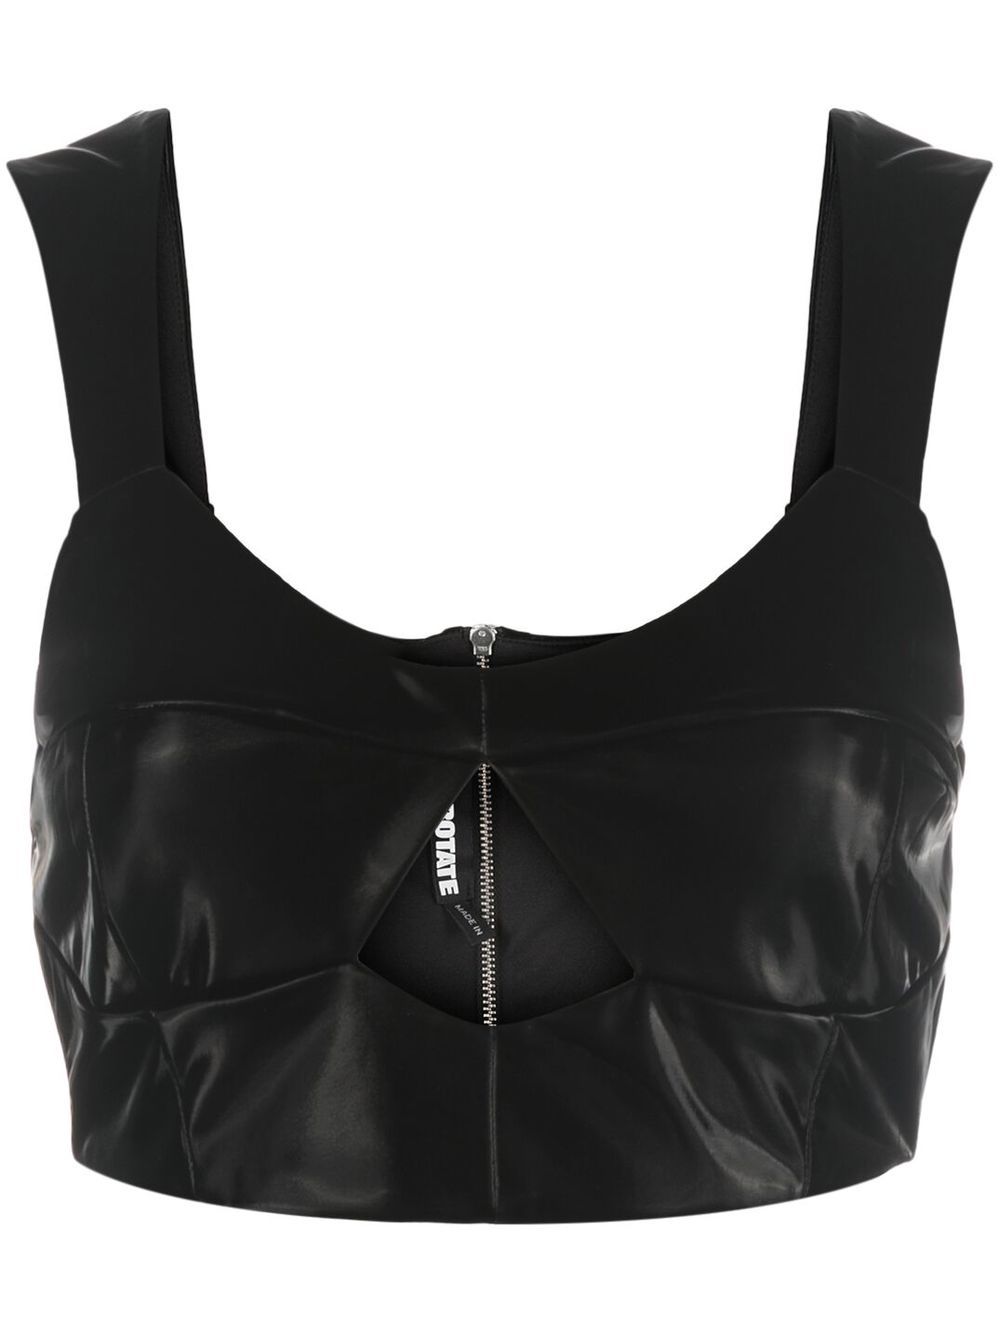 ROTATE faux leather cropped tank top - Black